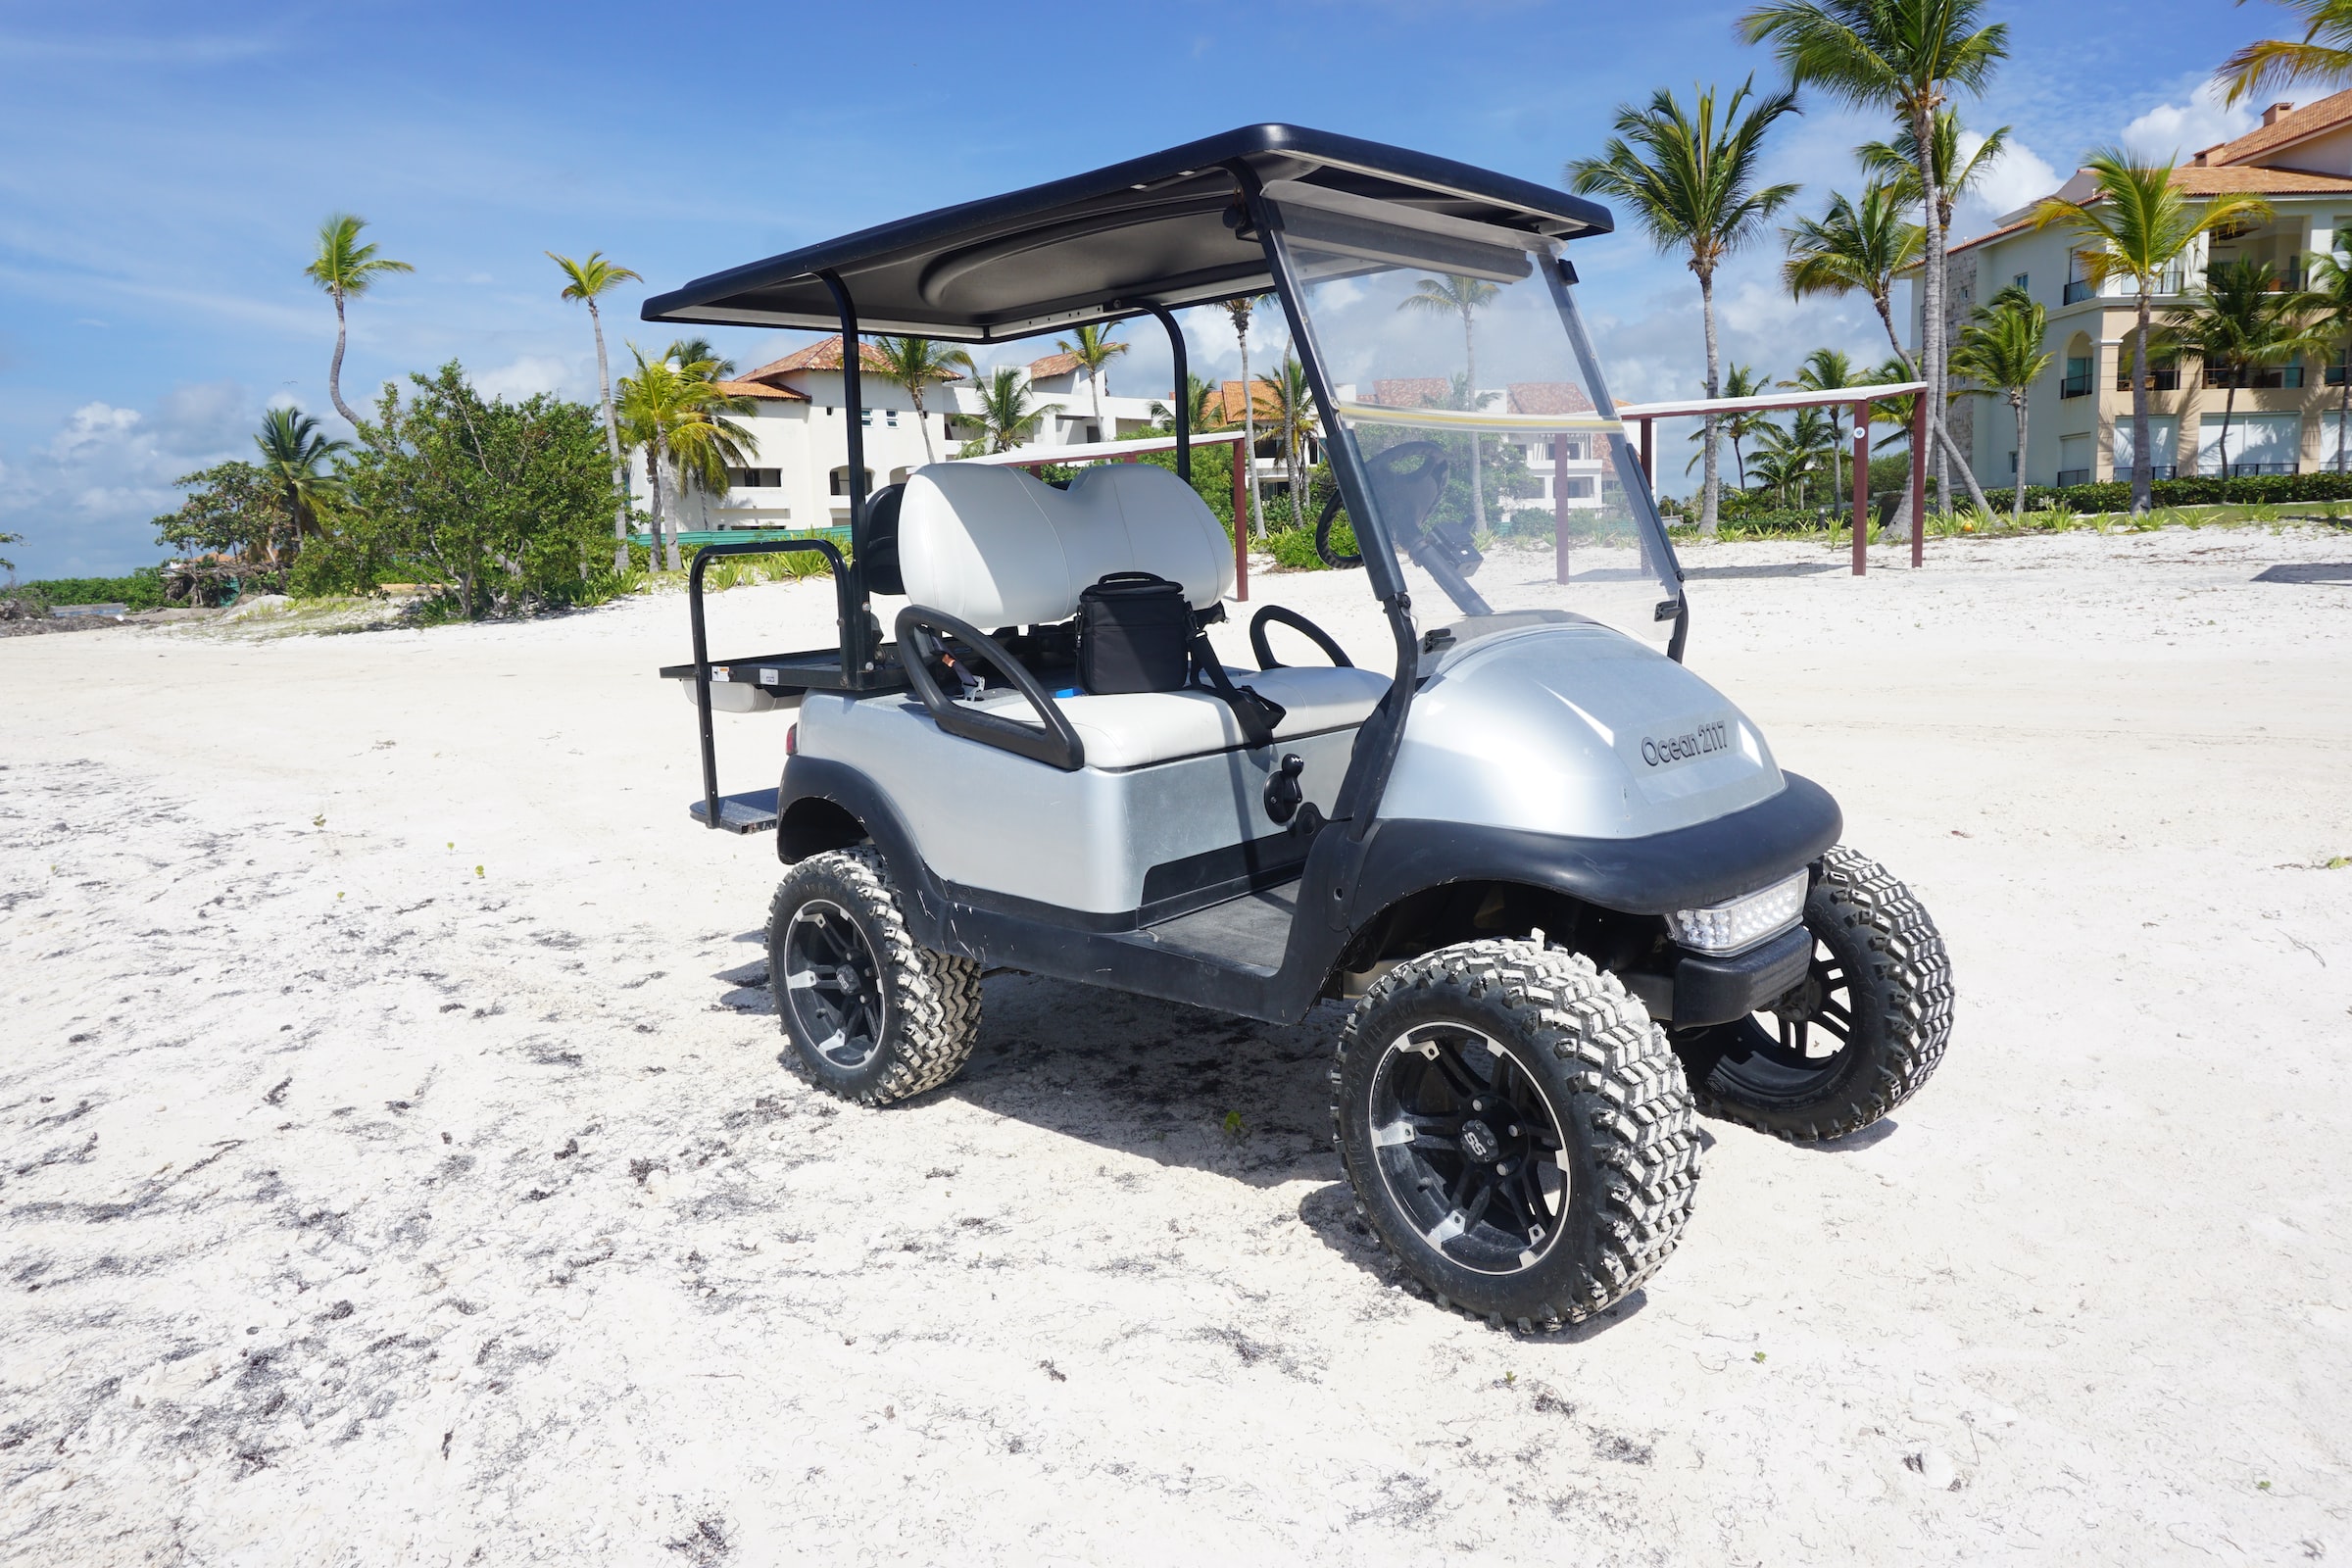 Buying a Golf Cart: Using a Golf Cart for a Daily Driver